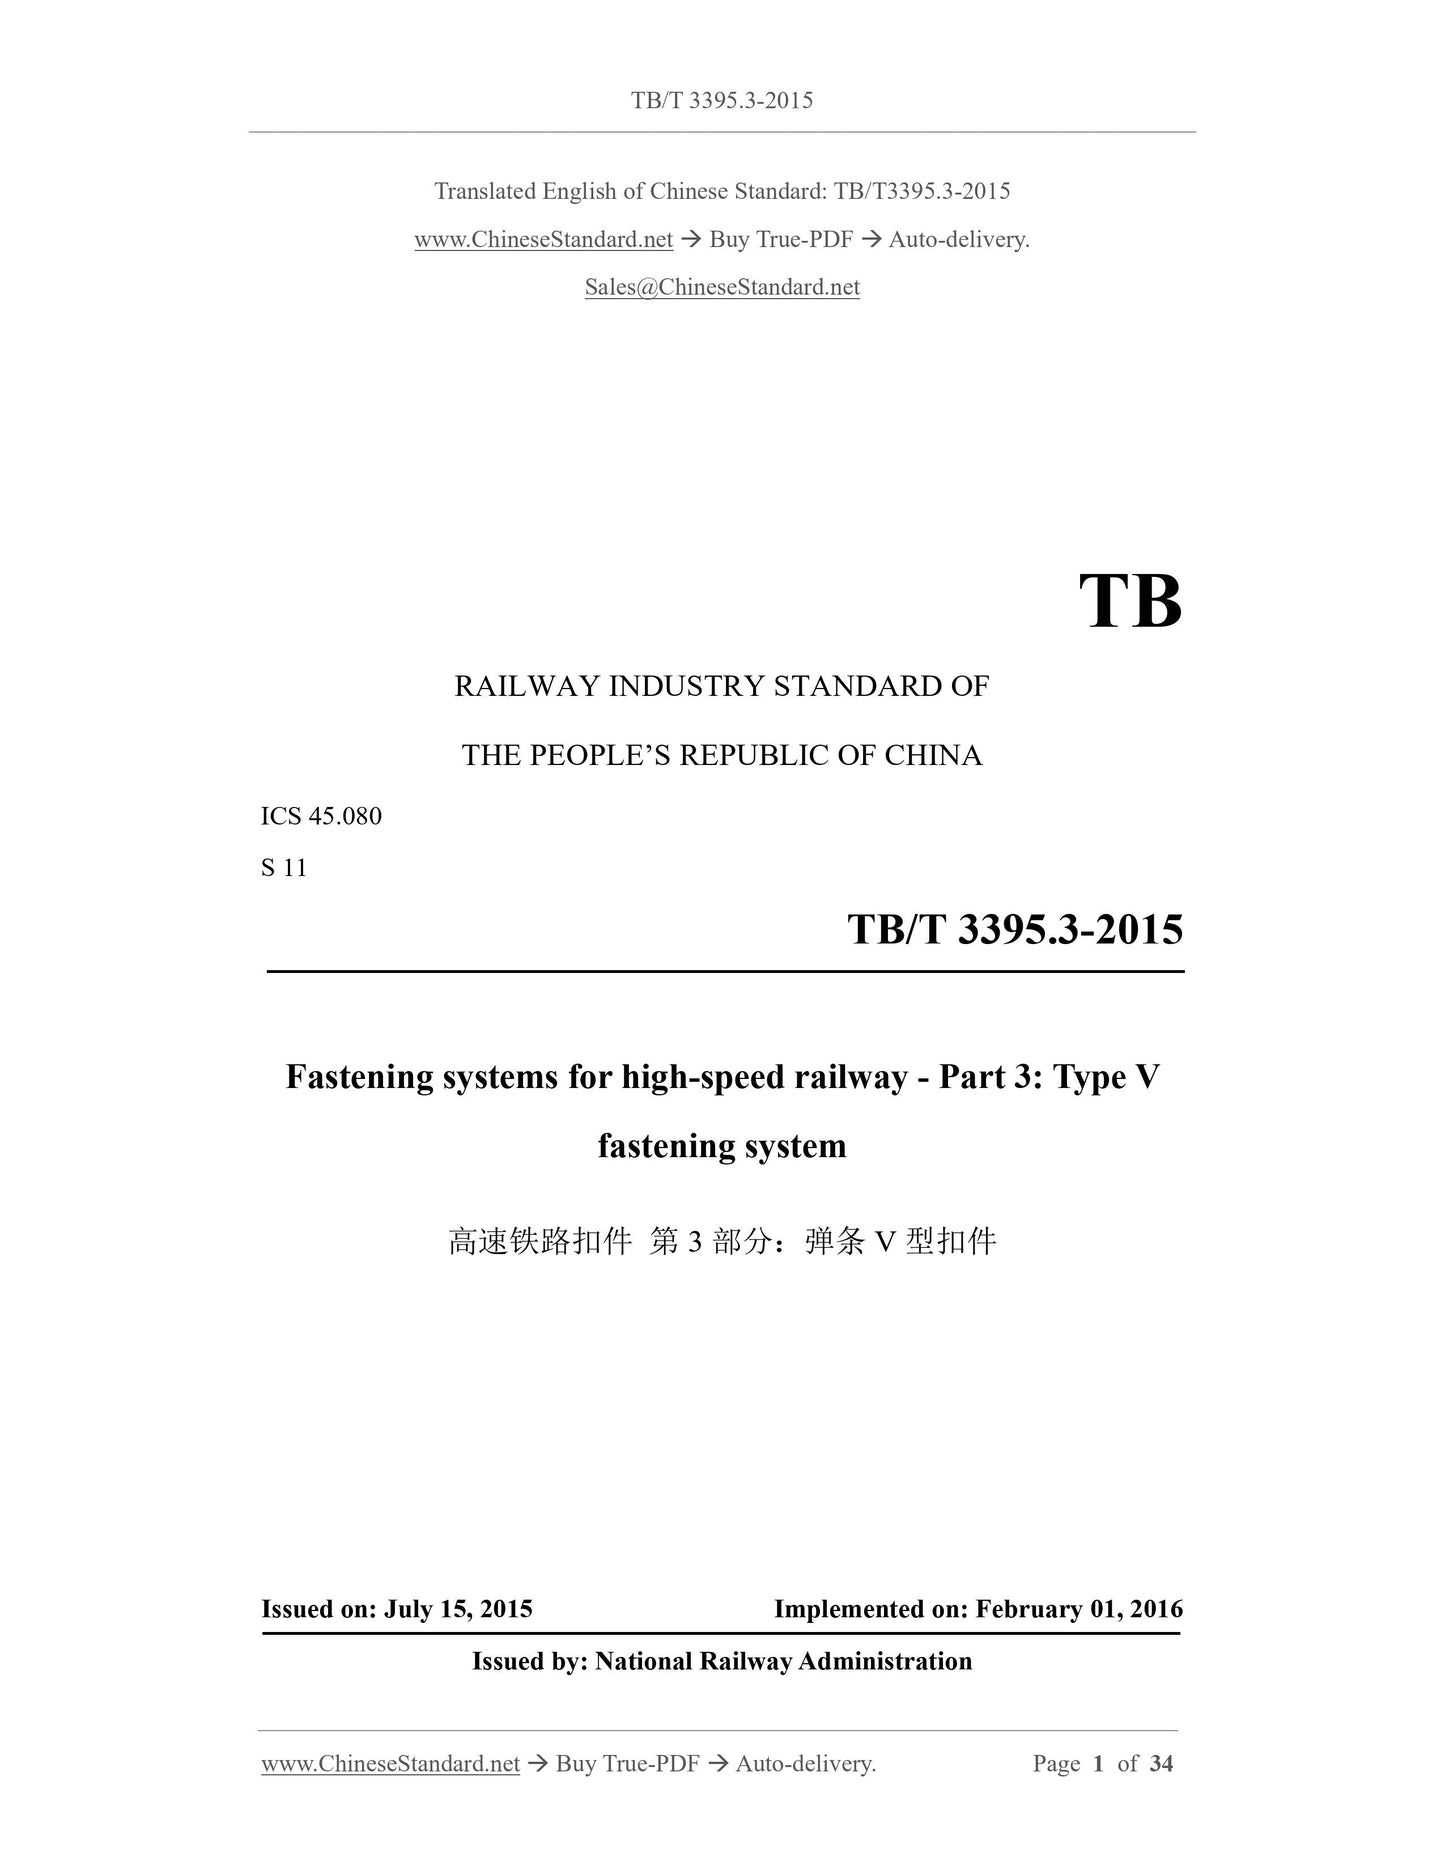 TB/T 3395.3-2015 Page 1